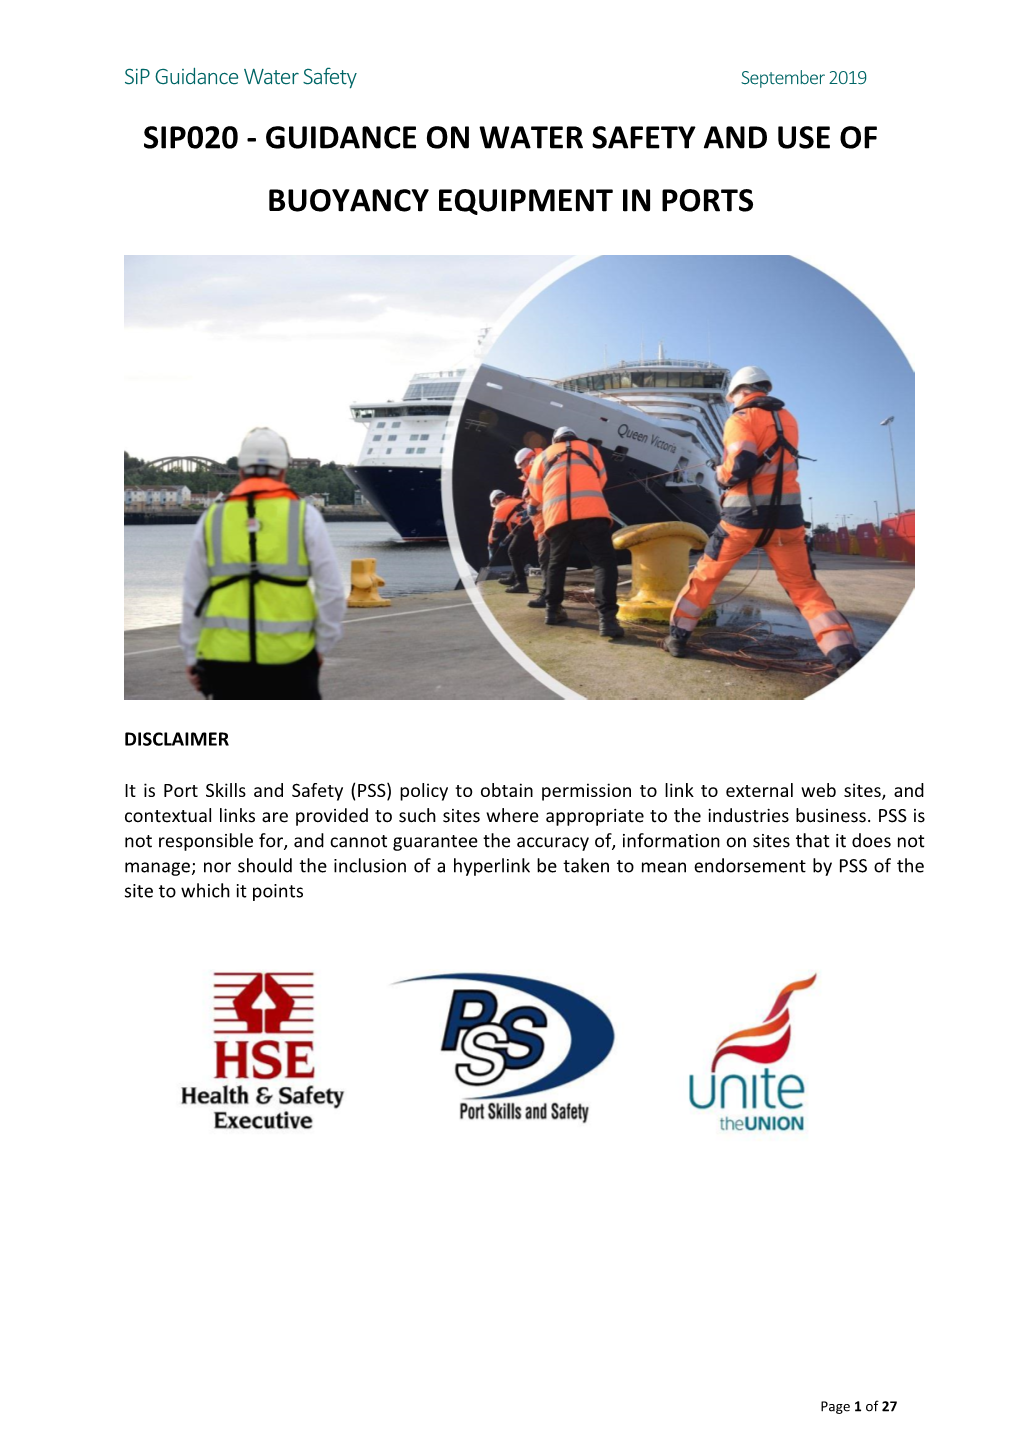 Sip020 - Guidance on Water Safety and Use of Buoyancy Equipment in Ports